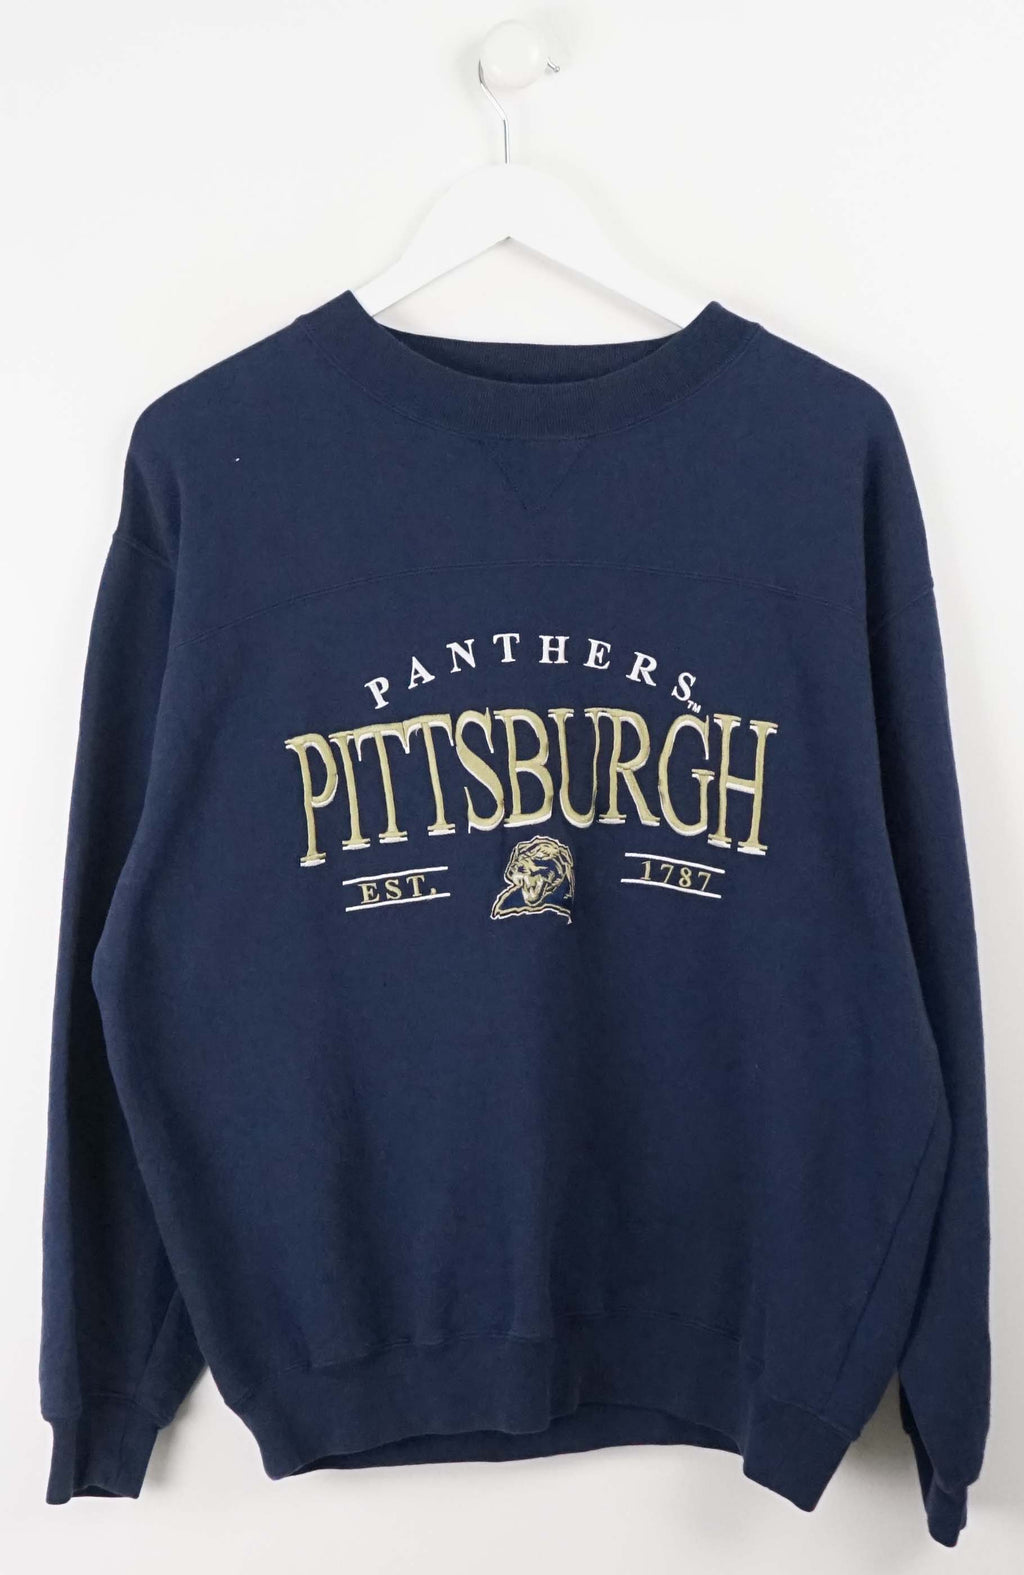 VINTAGE PITTSBURGH PANTHERS SWEATER (M)